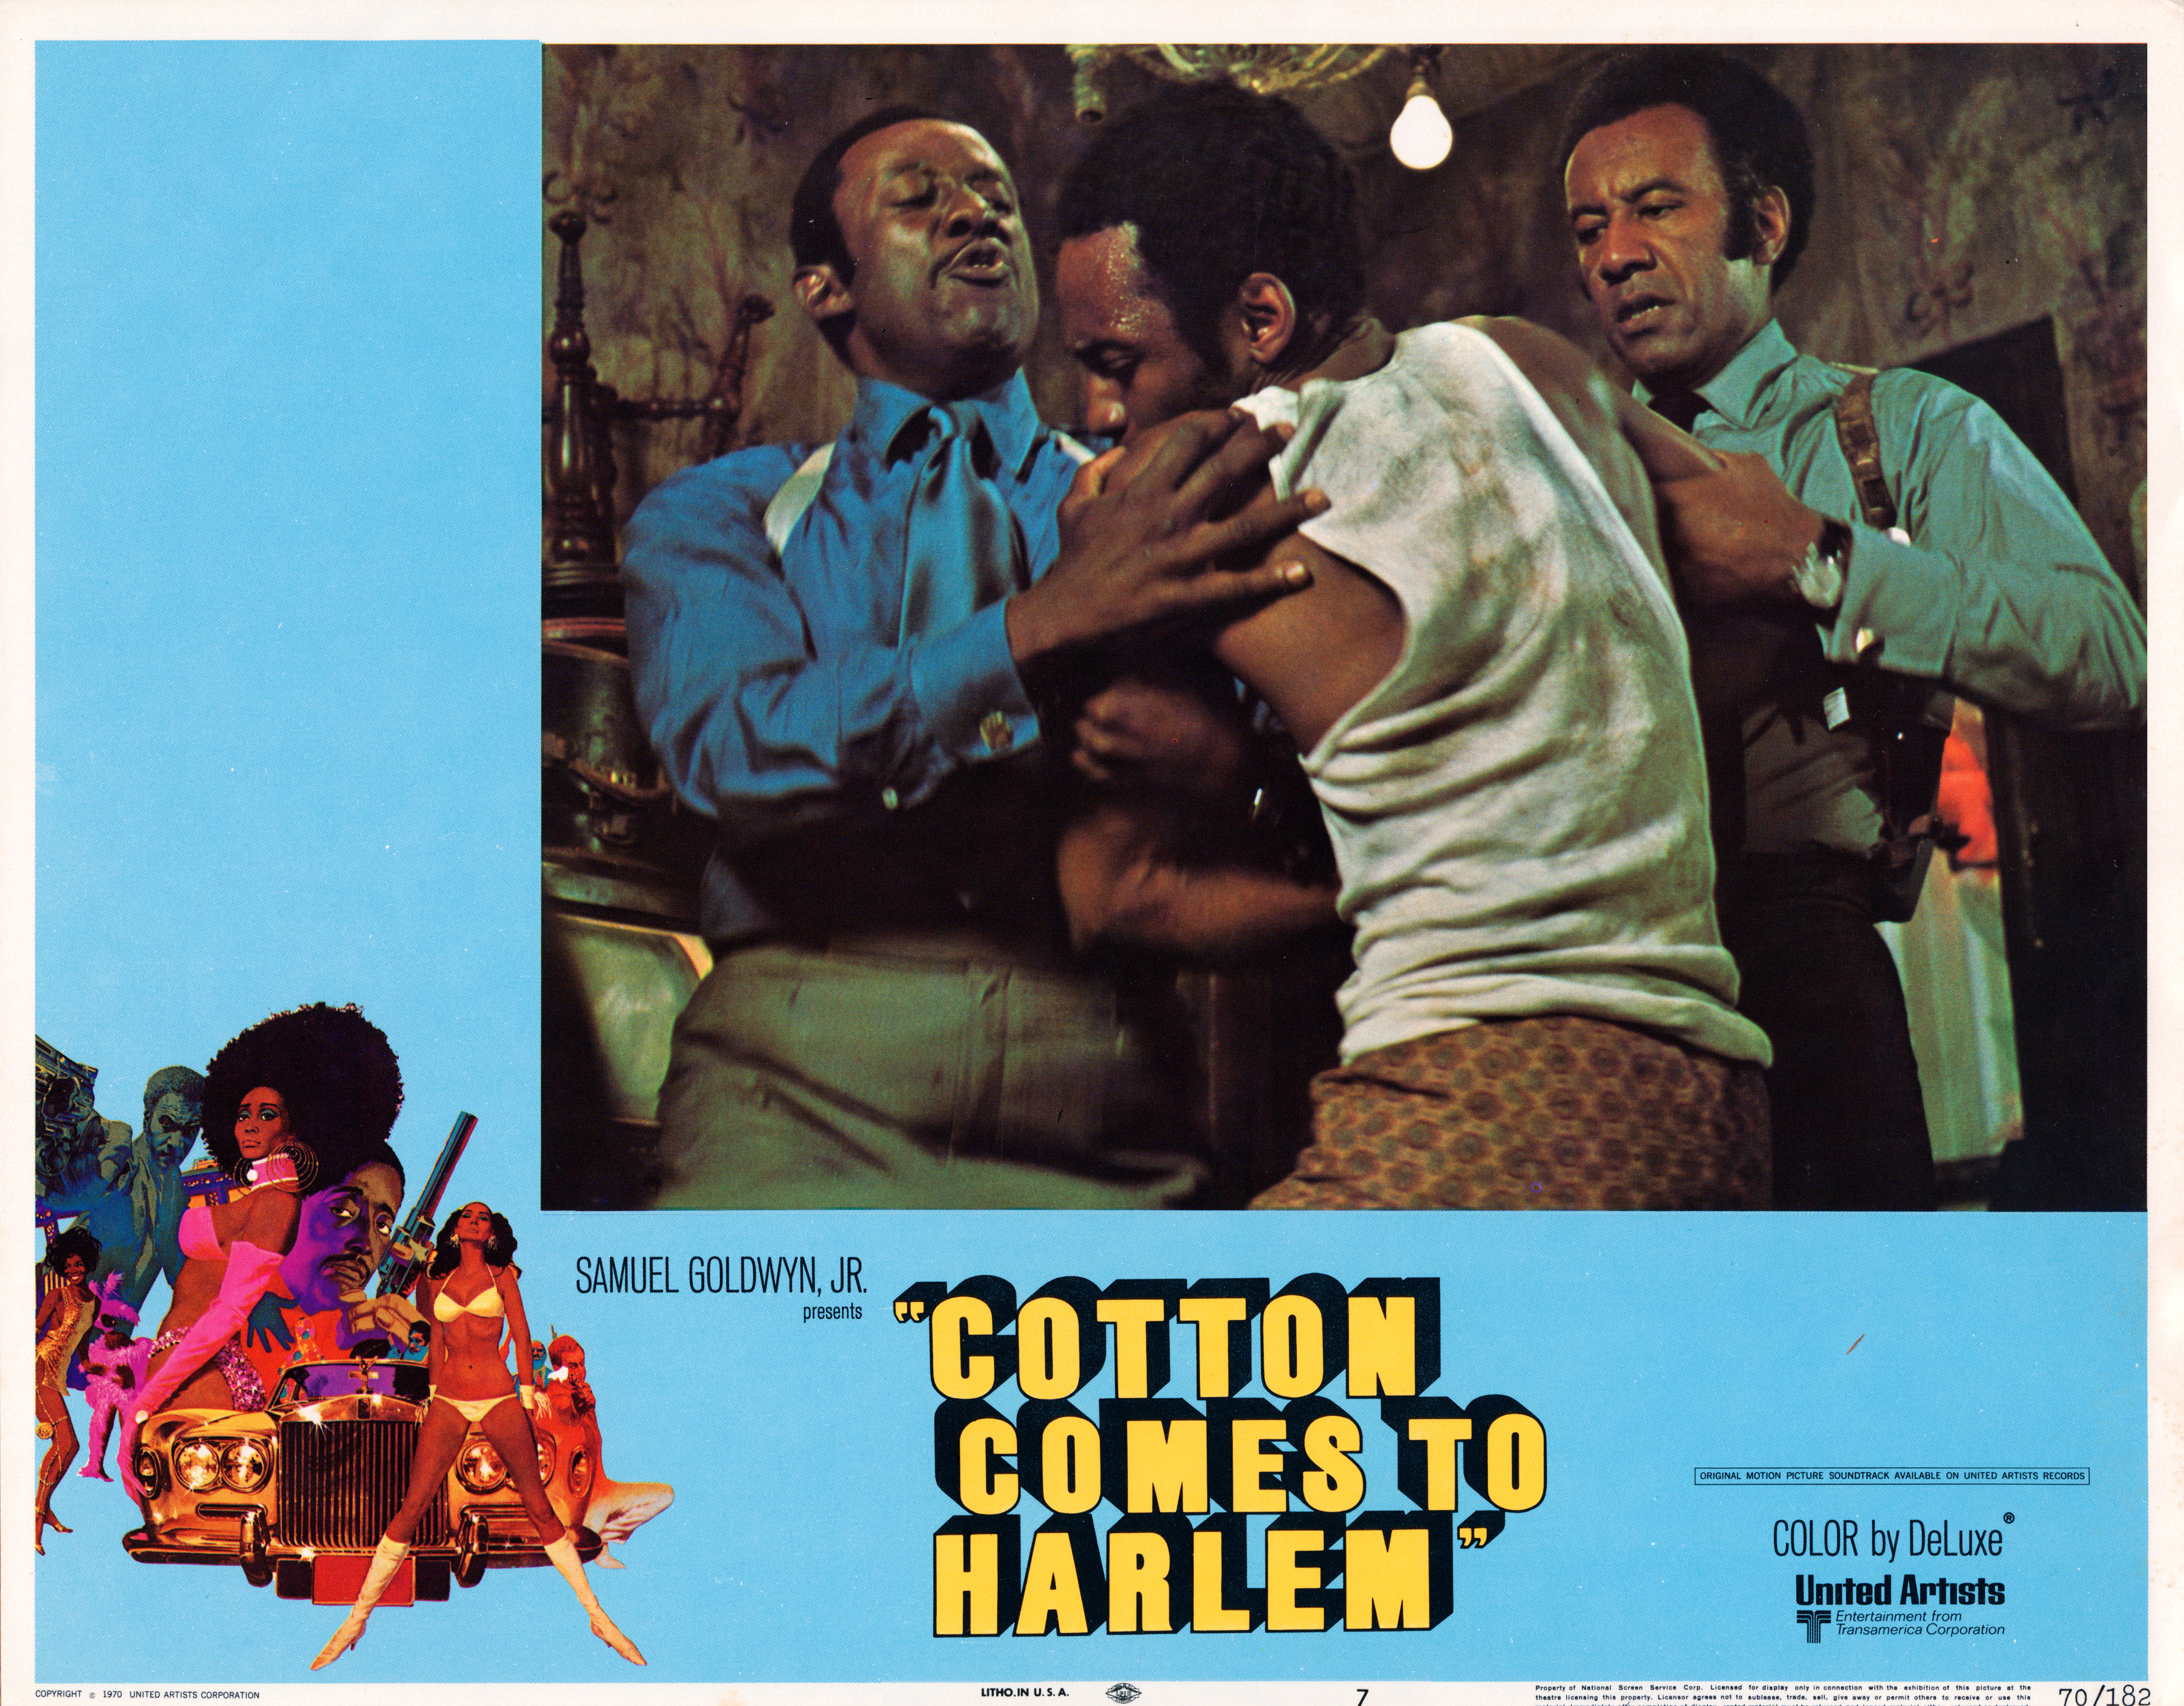 This is the lobby card from Cottom Comes To Harlem.